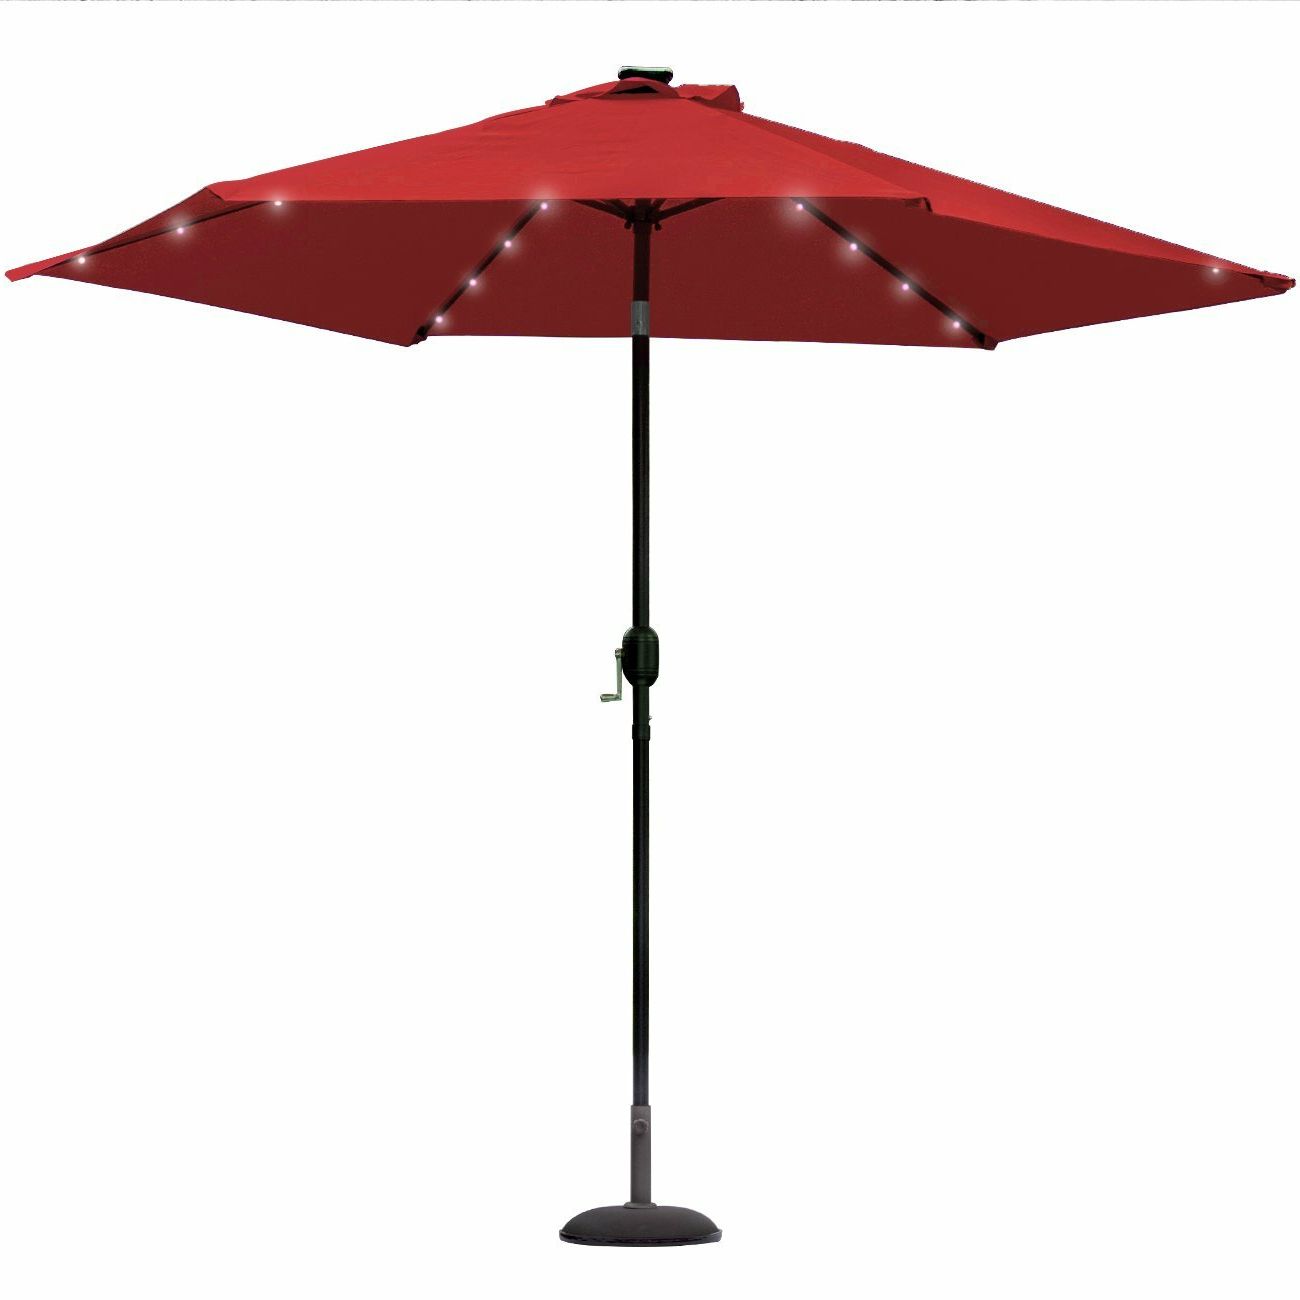 Widely Used Branscum Lighted Umbrellas Regarding Darby Home Co Rahate Solar Led Outdoor 10' Market Umbrella (View 20 of 20)